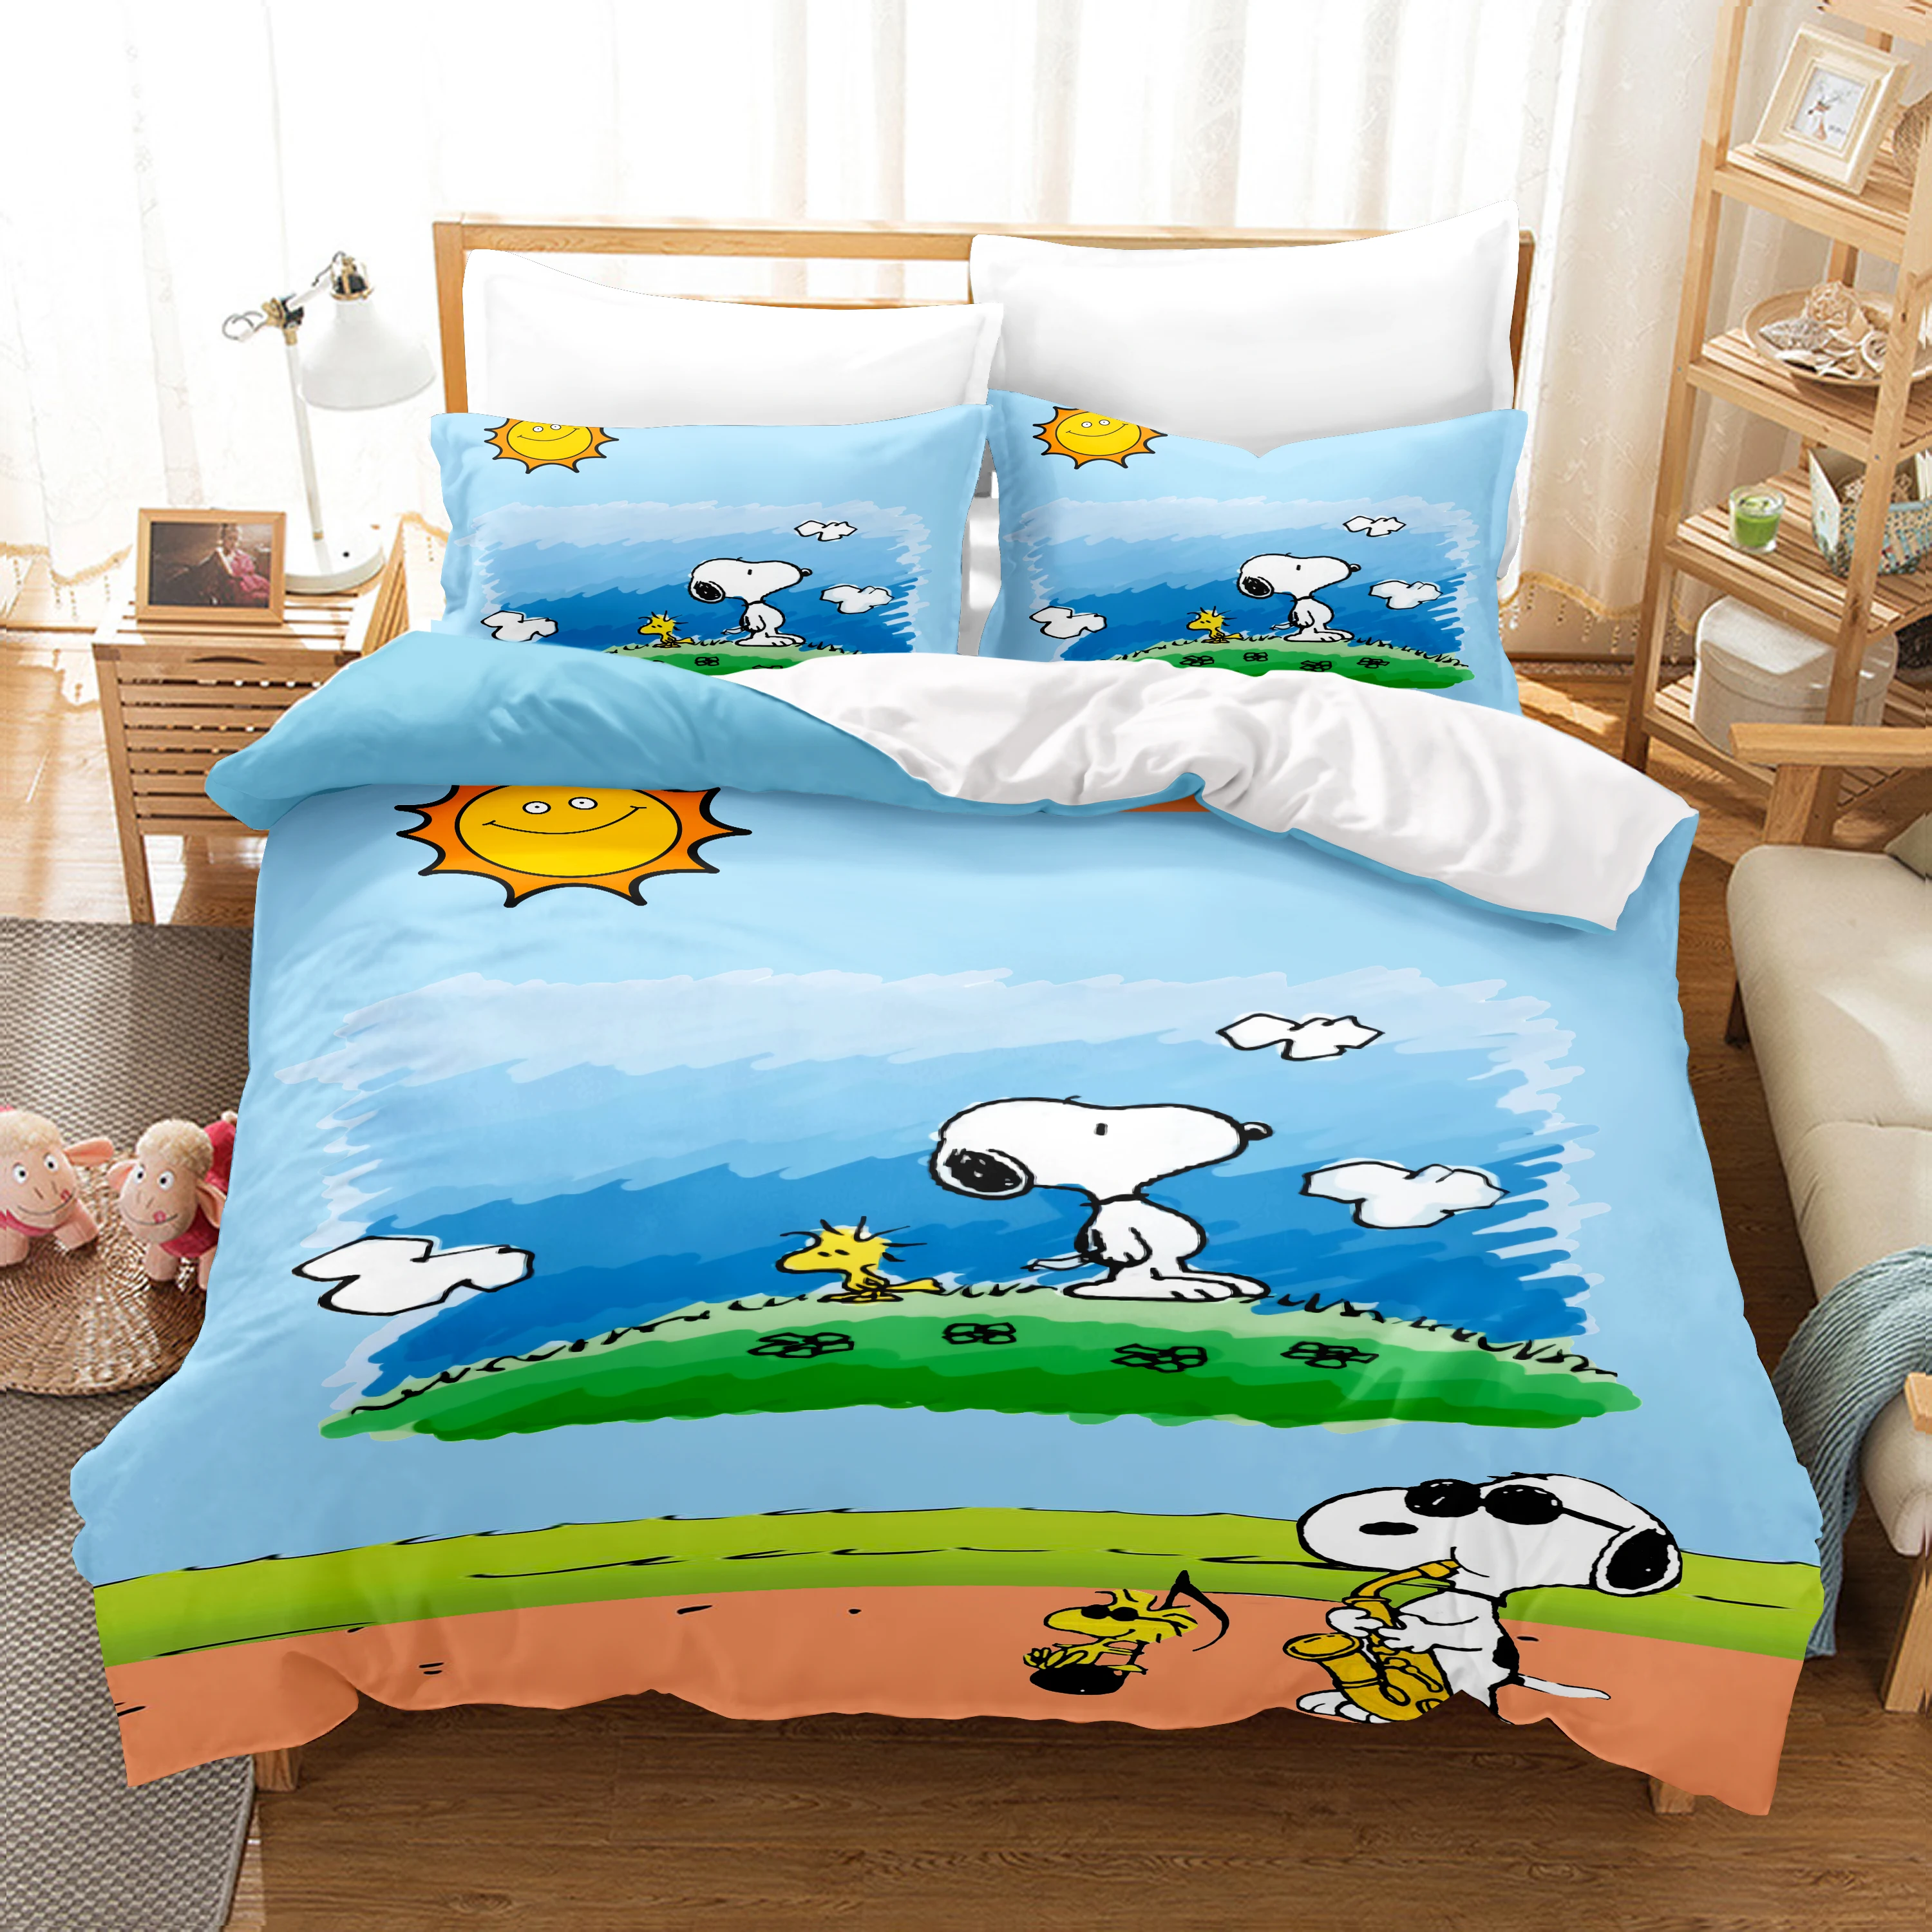 Snoopy Luxury Bedding Set Cute Printed Cartoon Quilt Cover Duvet Cover 3-Piece Set 1 Twin Covers